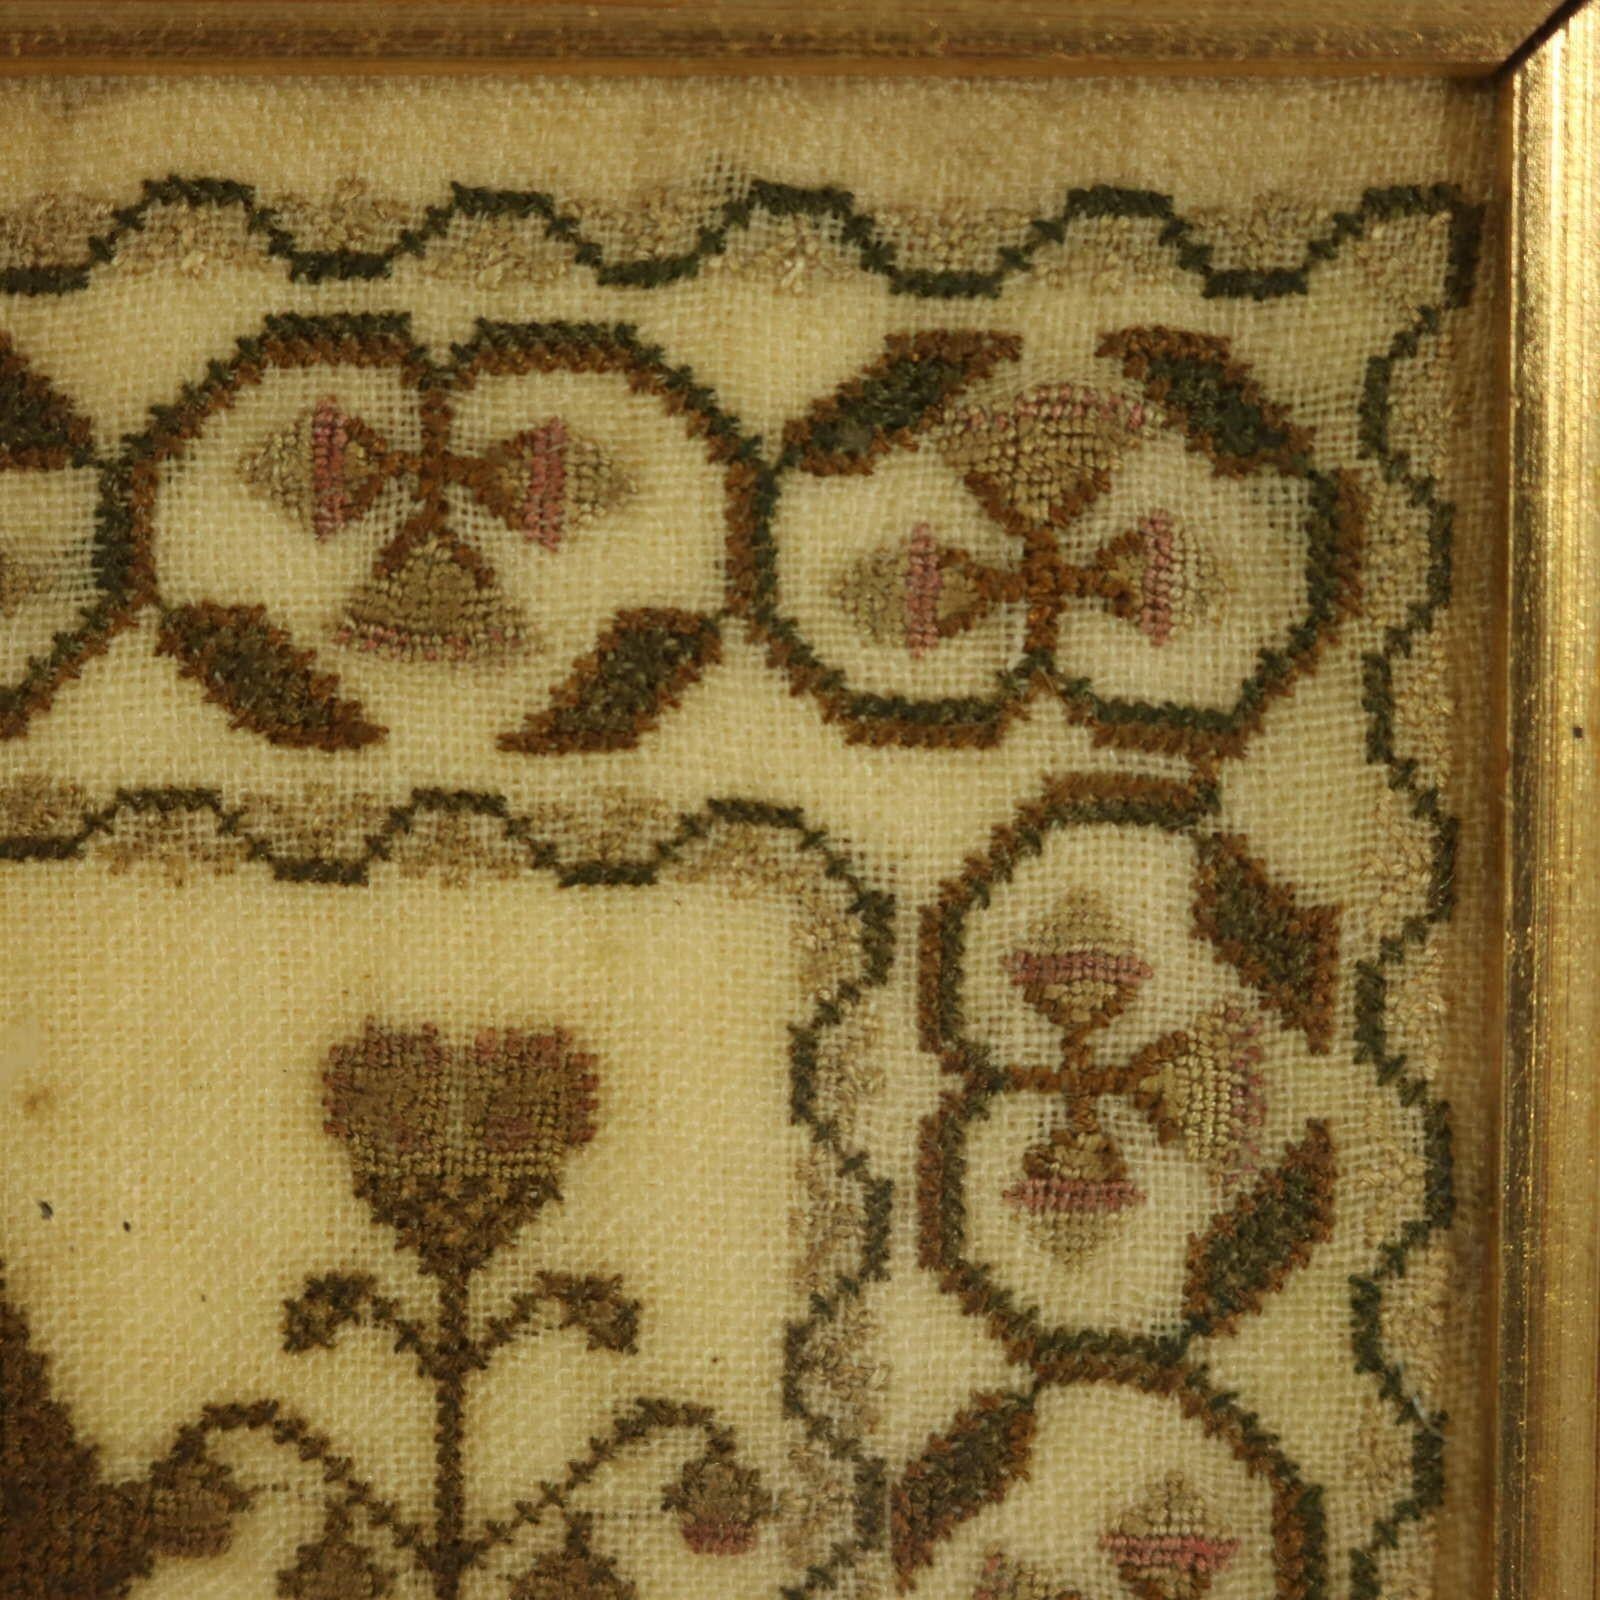 Antique Sampler, 1824, by Mary Richards aged 13 5